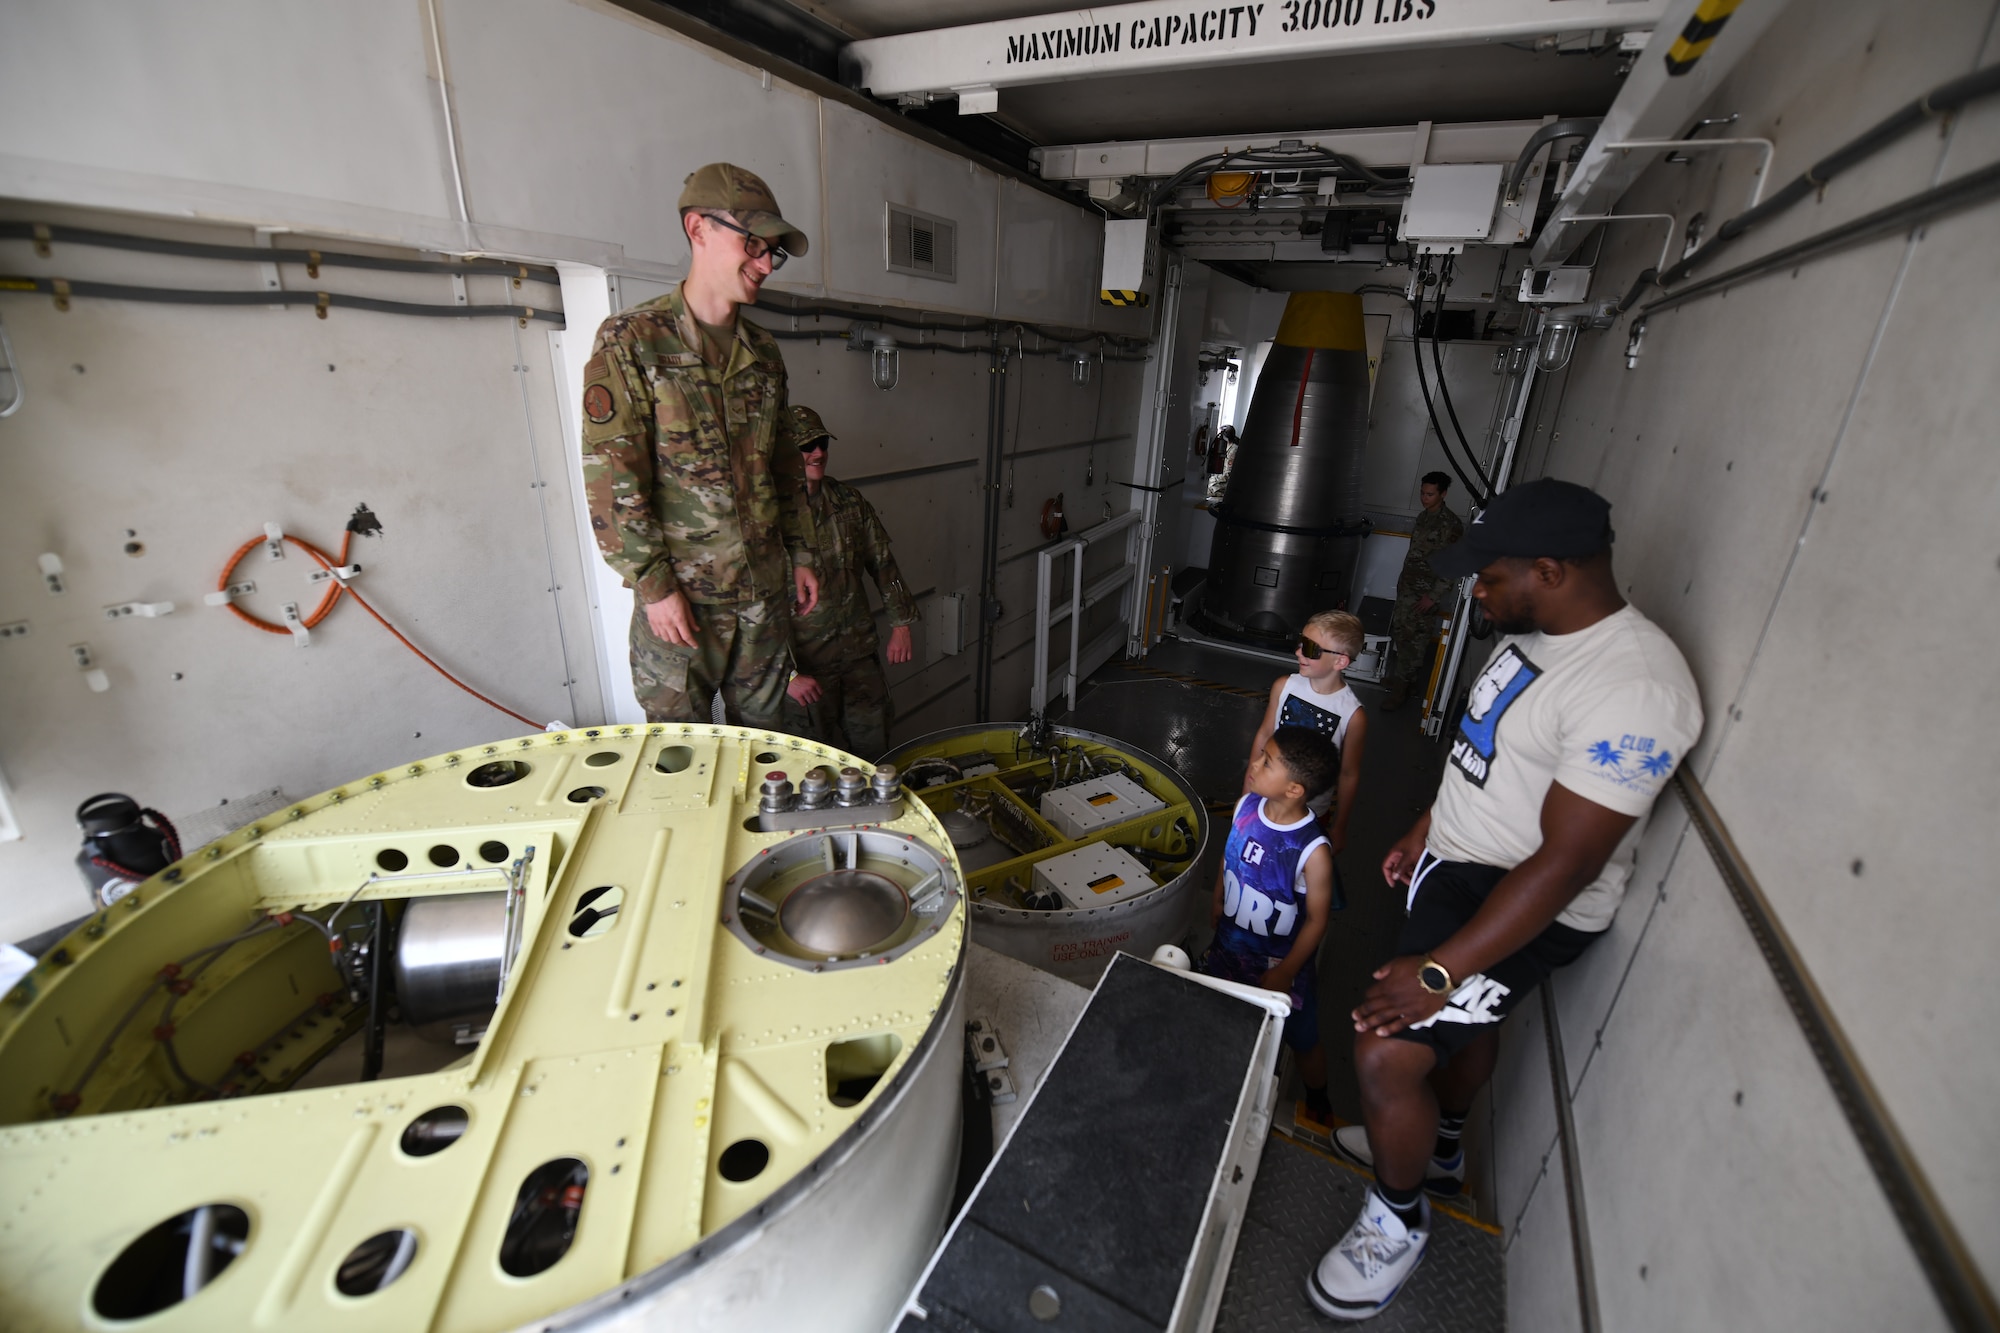 Technicians from the 341st Maintenance Group explain the interior of a Payload Transporter III during Montana's Military Open House "Flight over the Falls" at Montana Air National Guard Base, Great Falls, Montana, July 24, 2022.